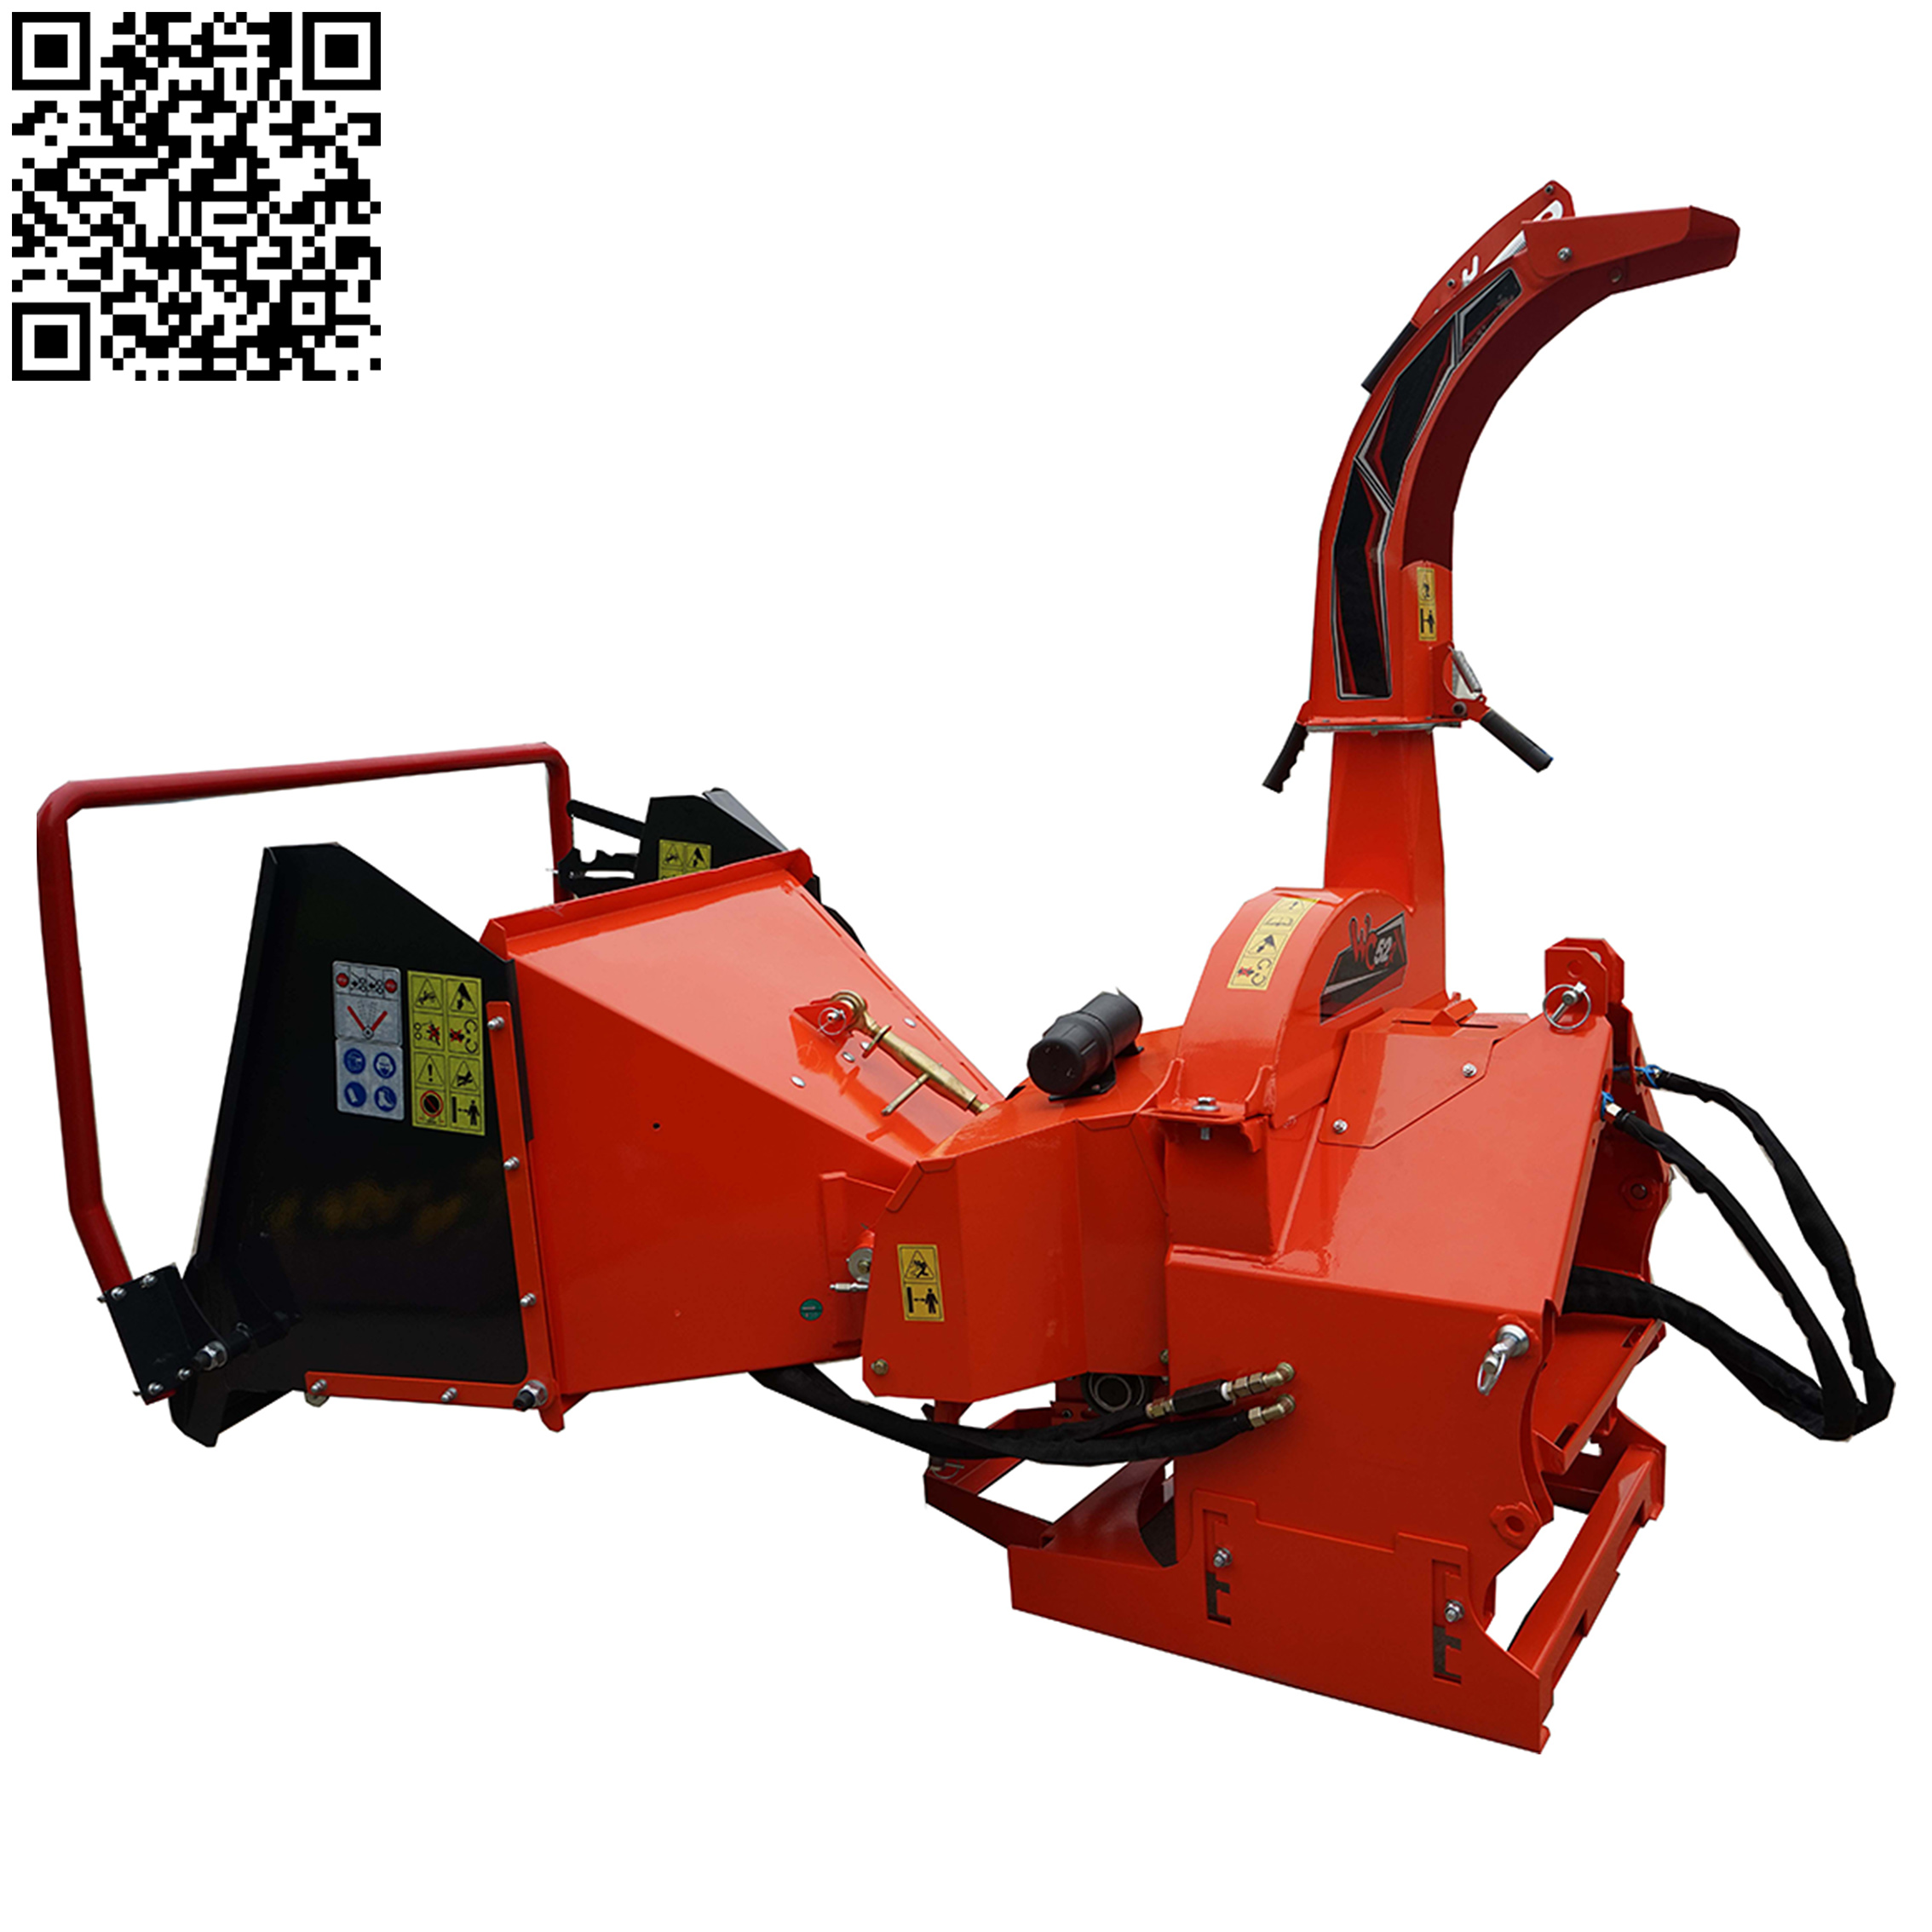 AGRICULTURAL WOOD CHIPPER